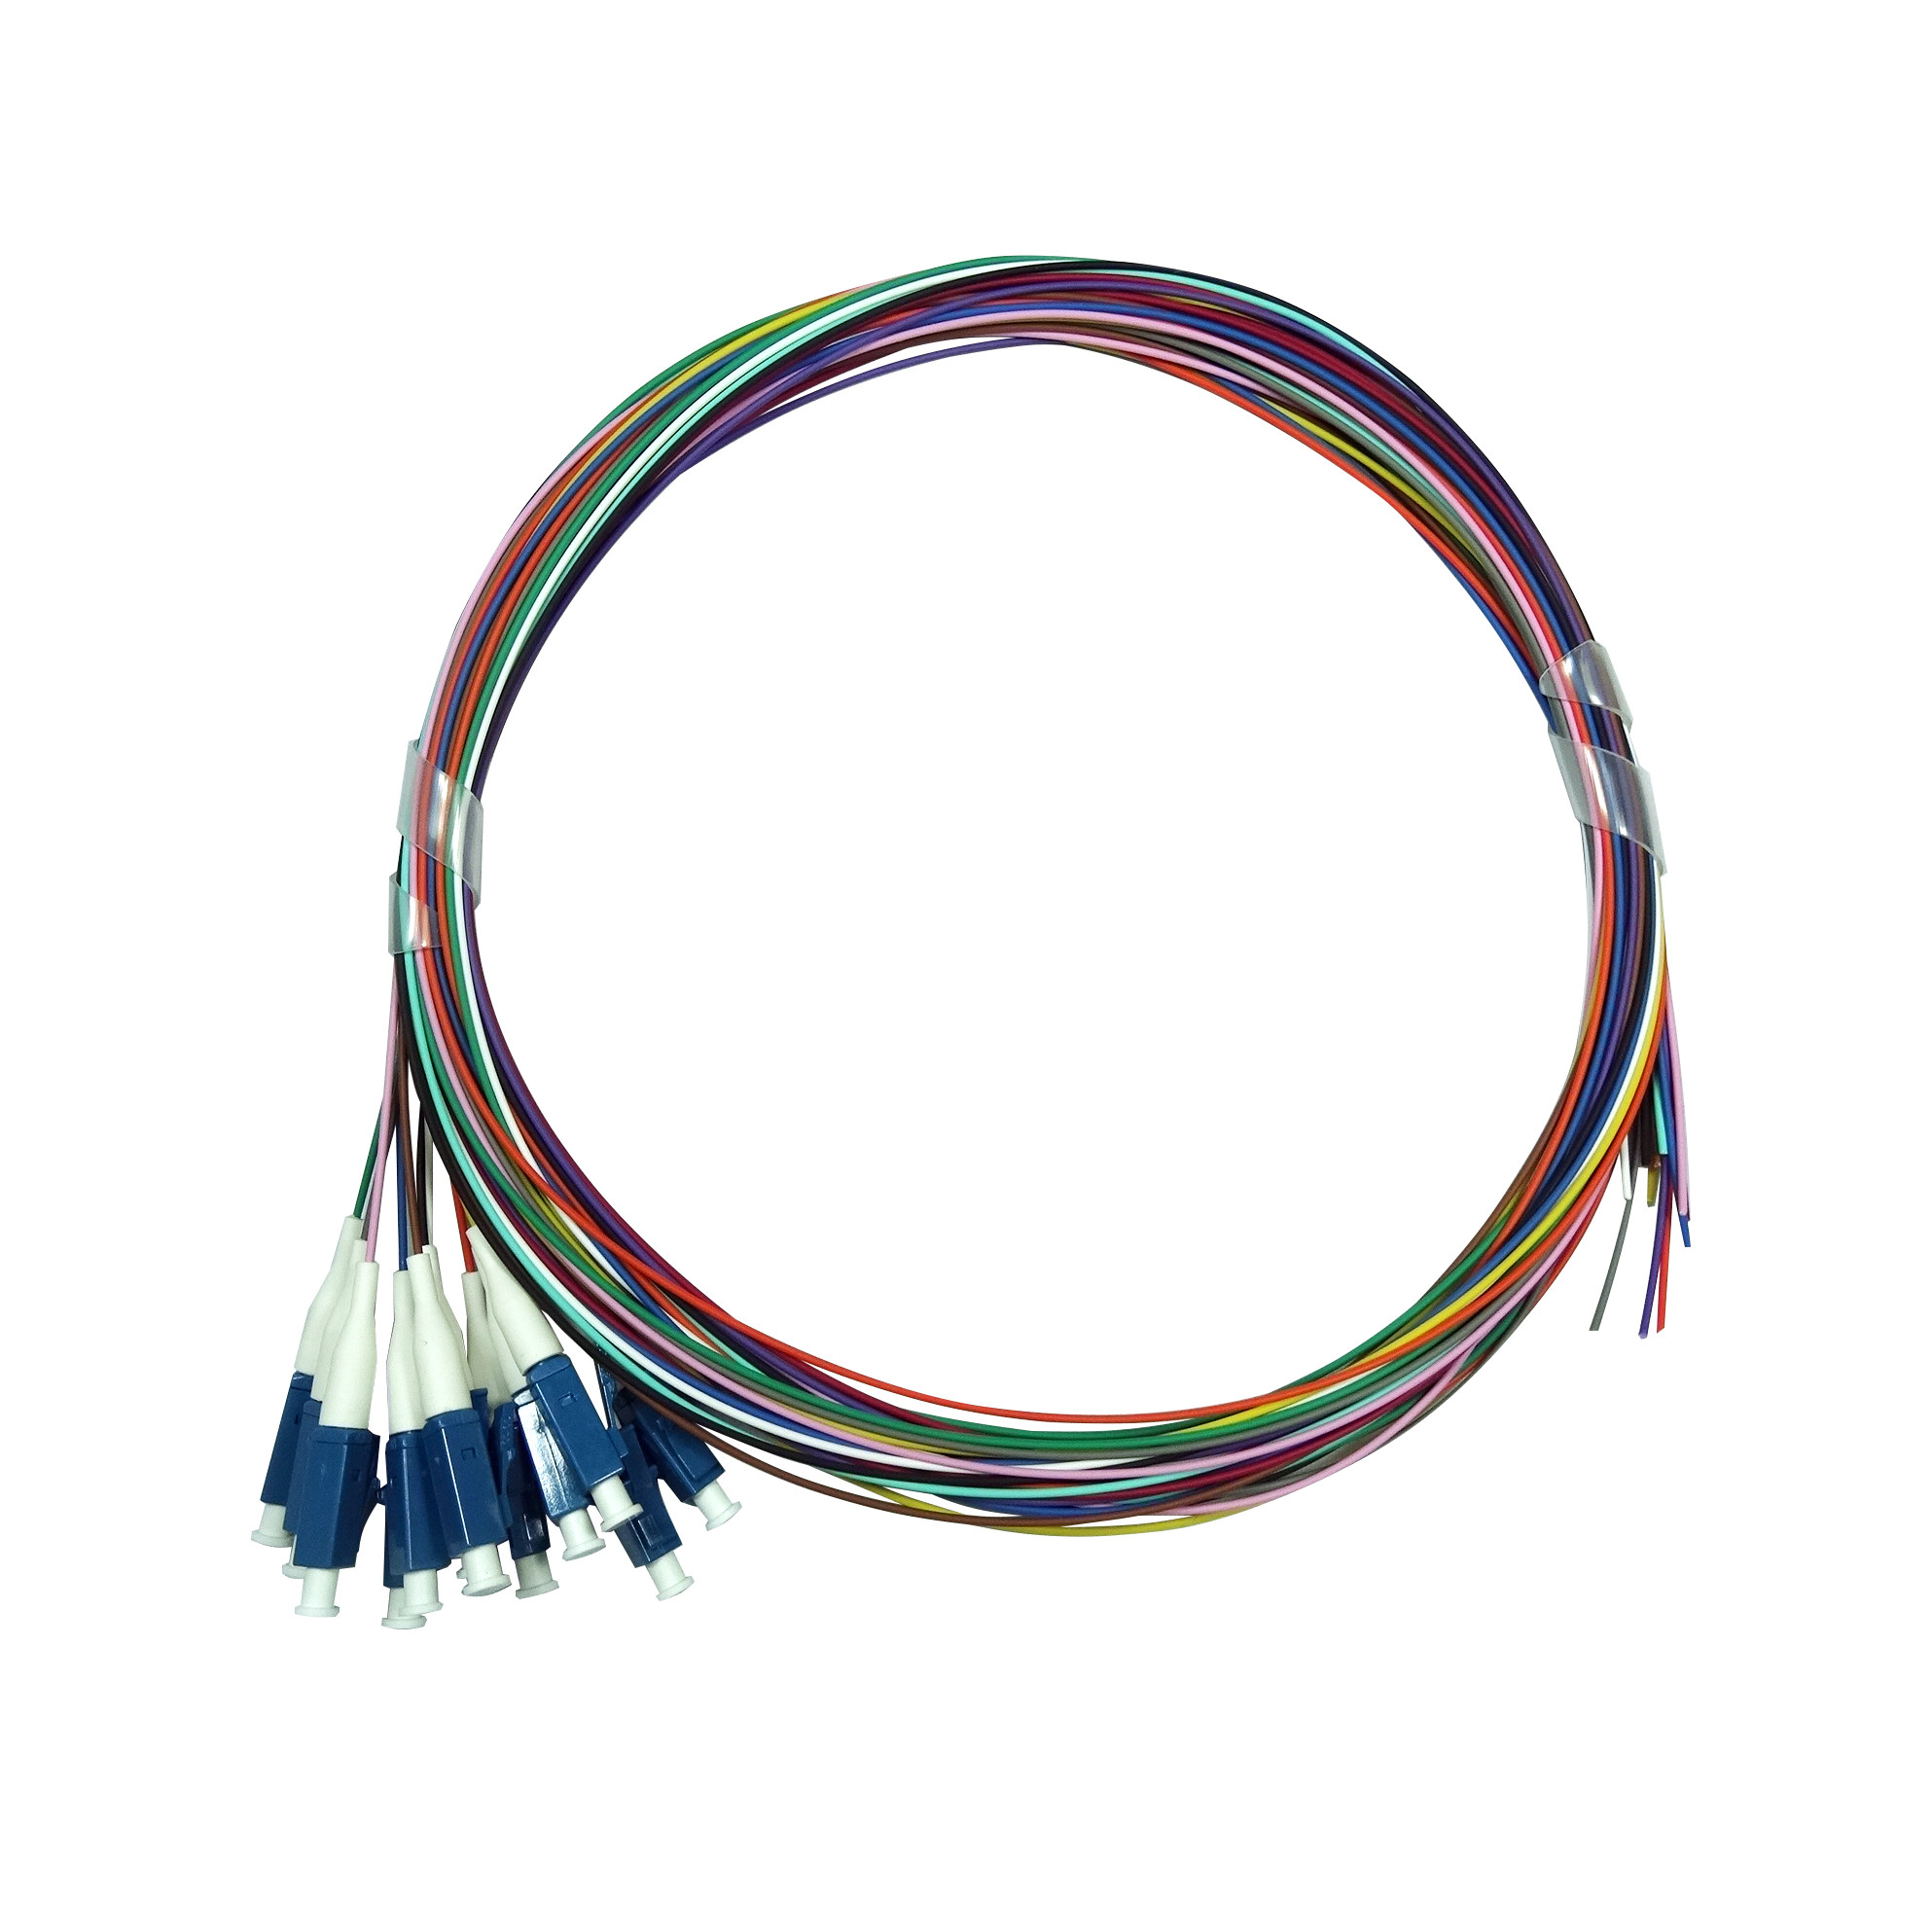 Buy 12FO Fiber Optic Pigtail LC UPC G652D G657A Length Customized LSZH at wholesale prices